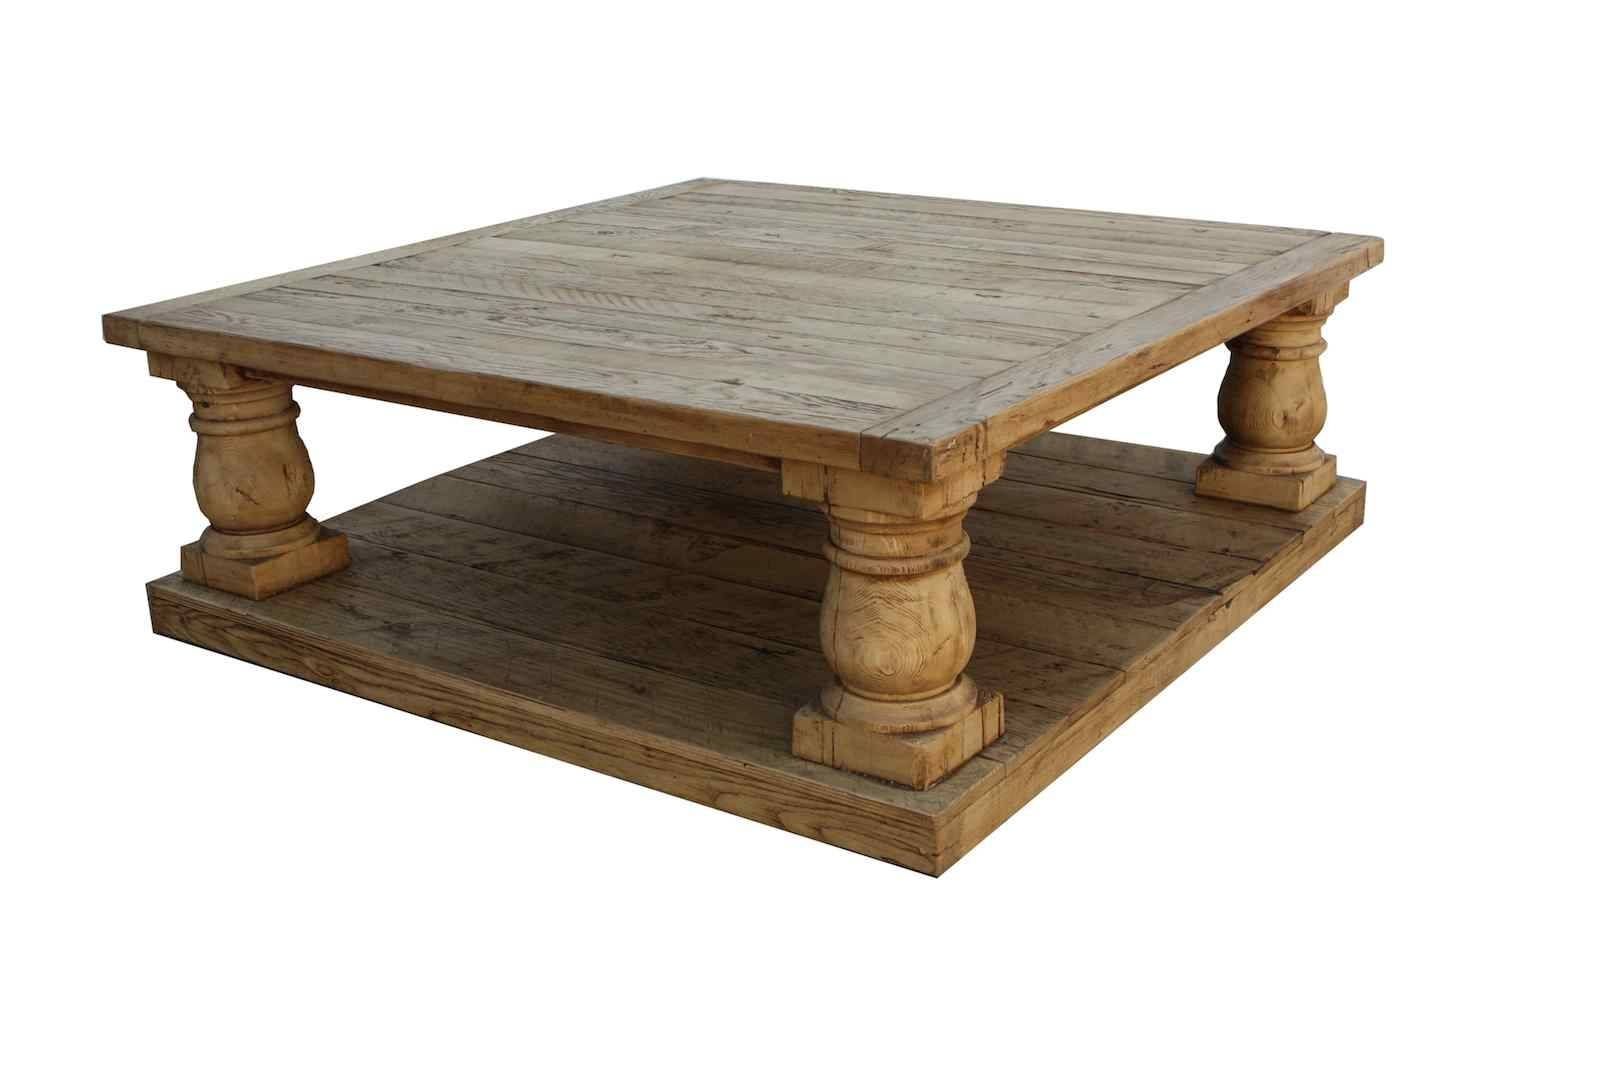 Large Reclaimed Wood Coffee Tables Design : Rustic Reclaimed Wood Within Large Wood Coffee Tables (View 3 of 15)